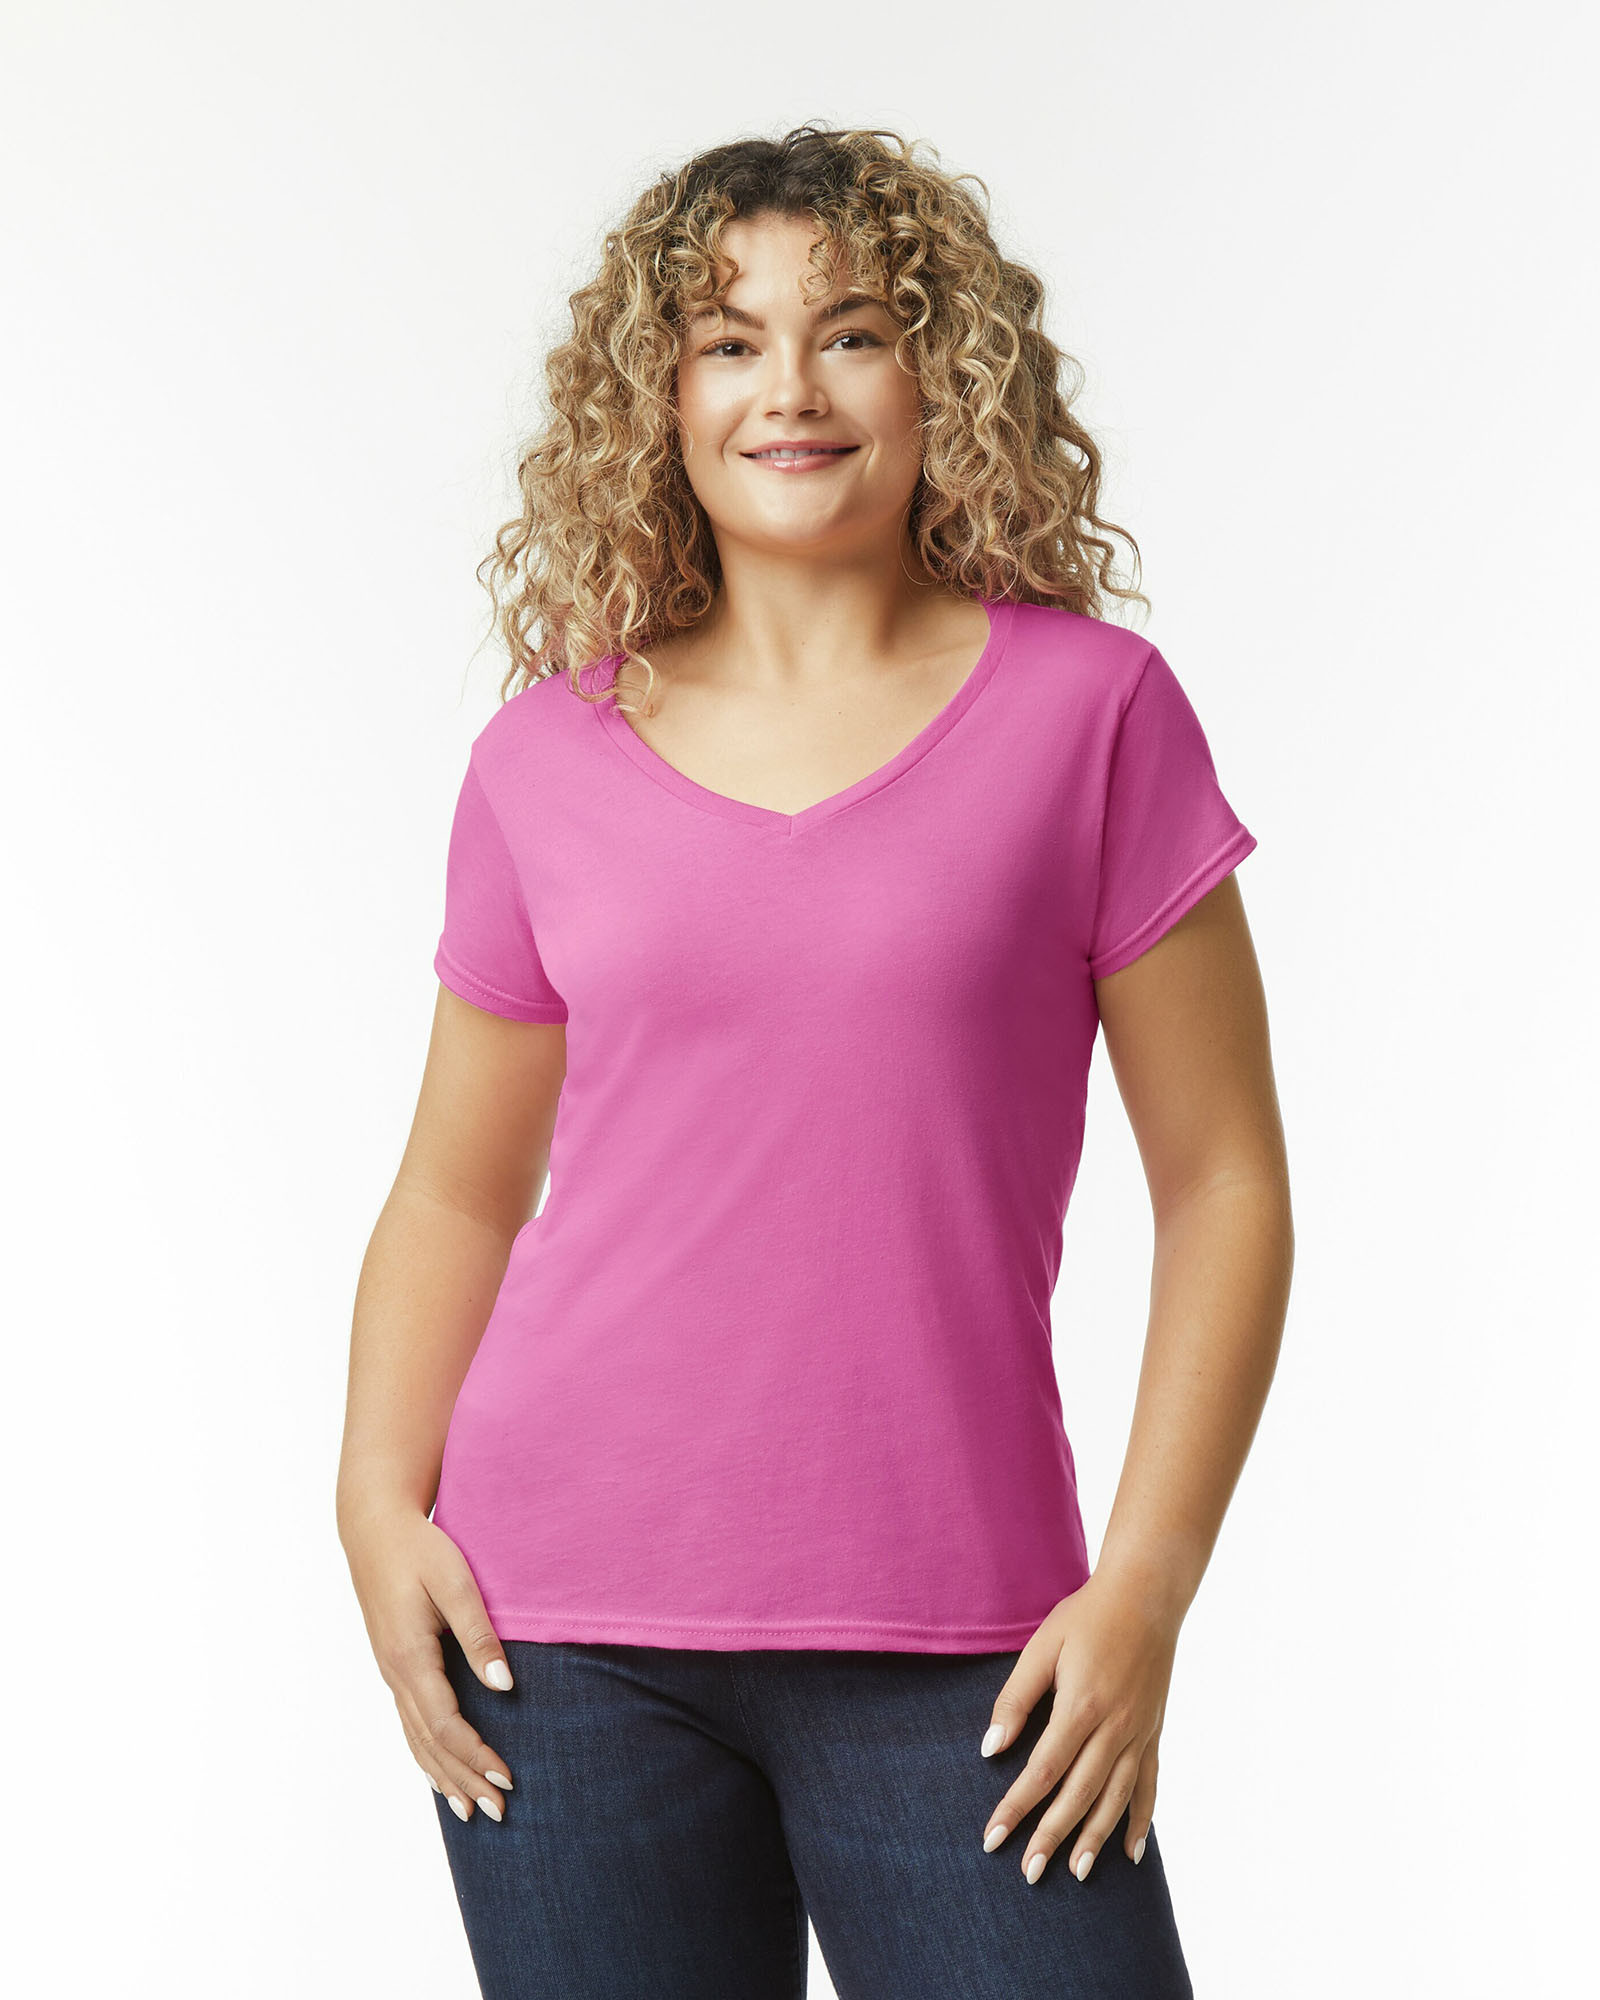 Ladies Soft Style V-Neck Tees Onilne Now | Blanktees NZ